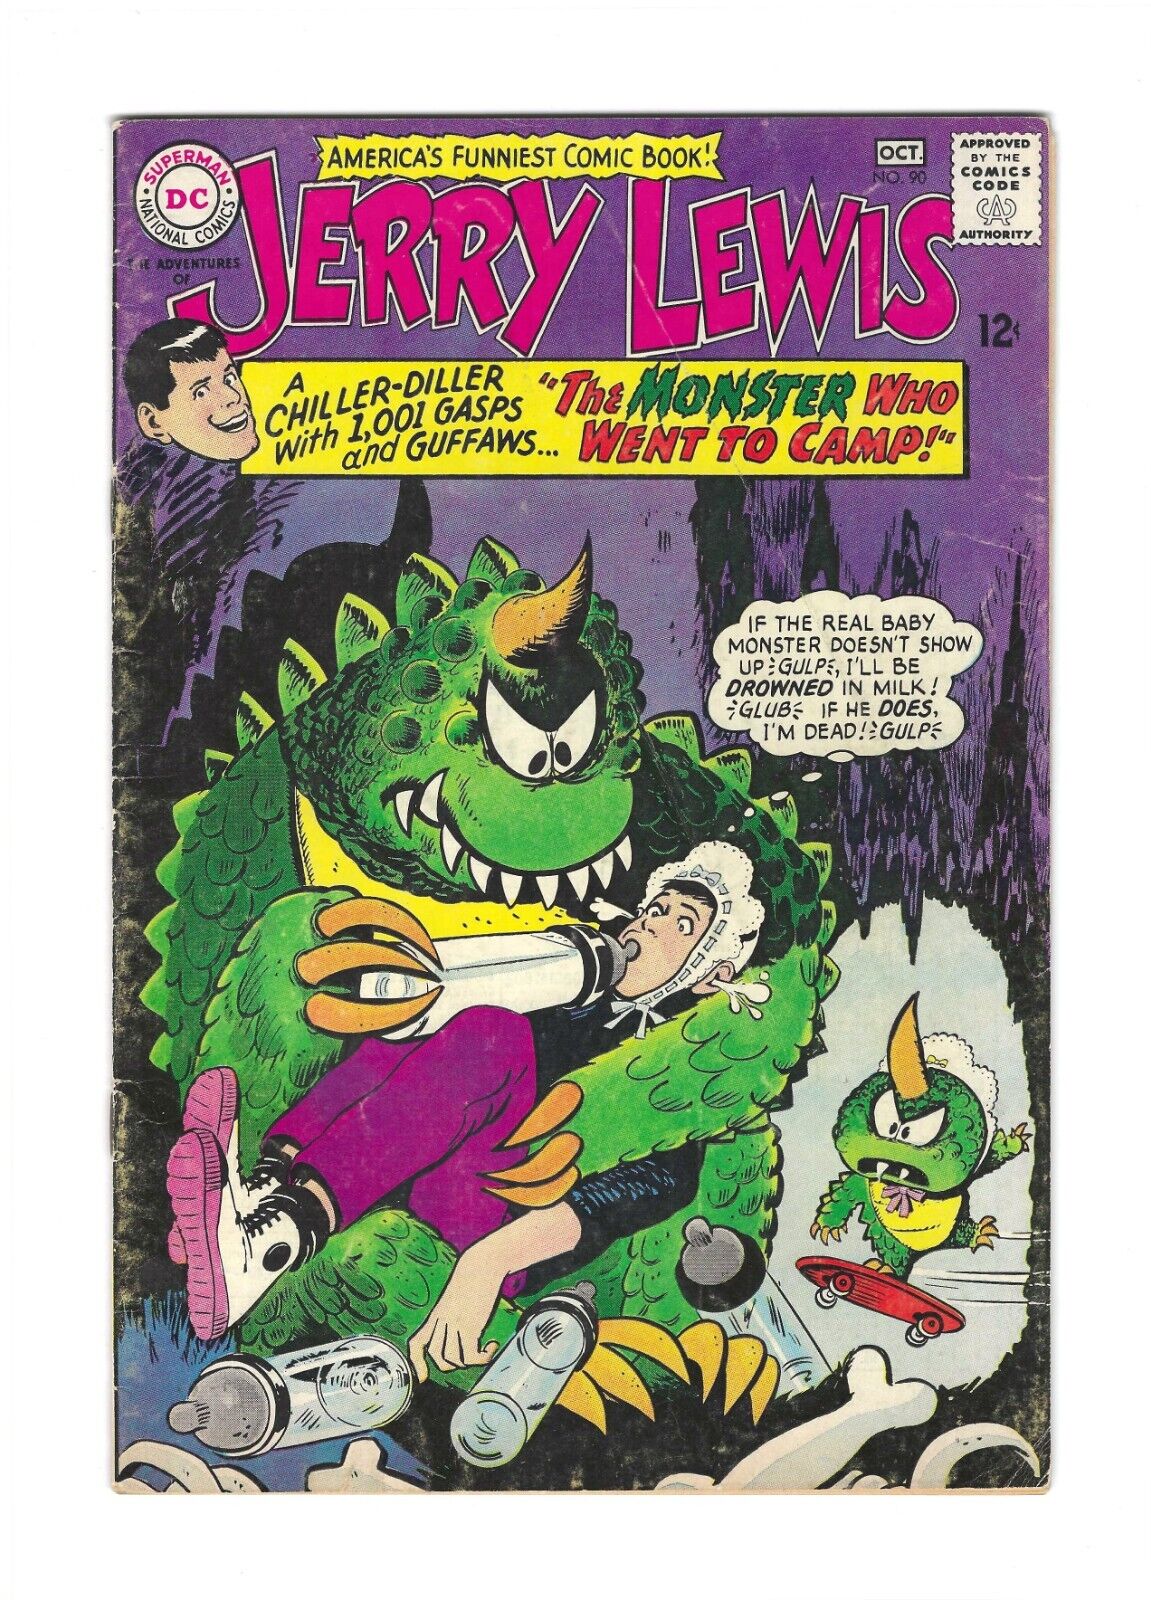 The Adventures of Jerry Lewis #90: Dry Cleaned: Pressed: Bagged: Boarded: FN 6.0